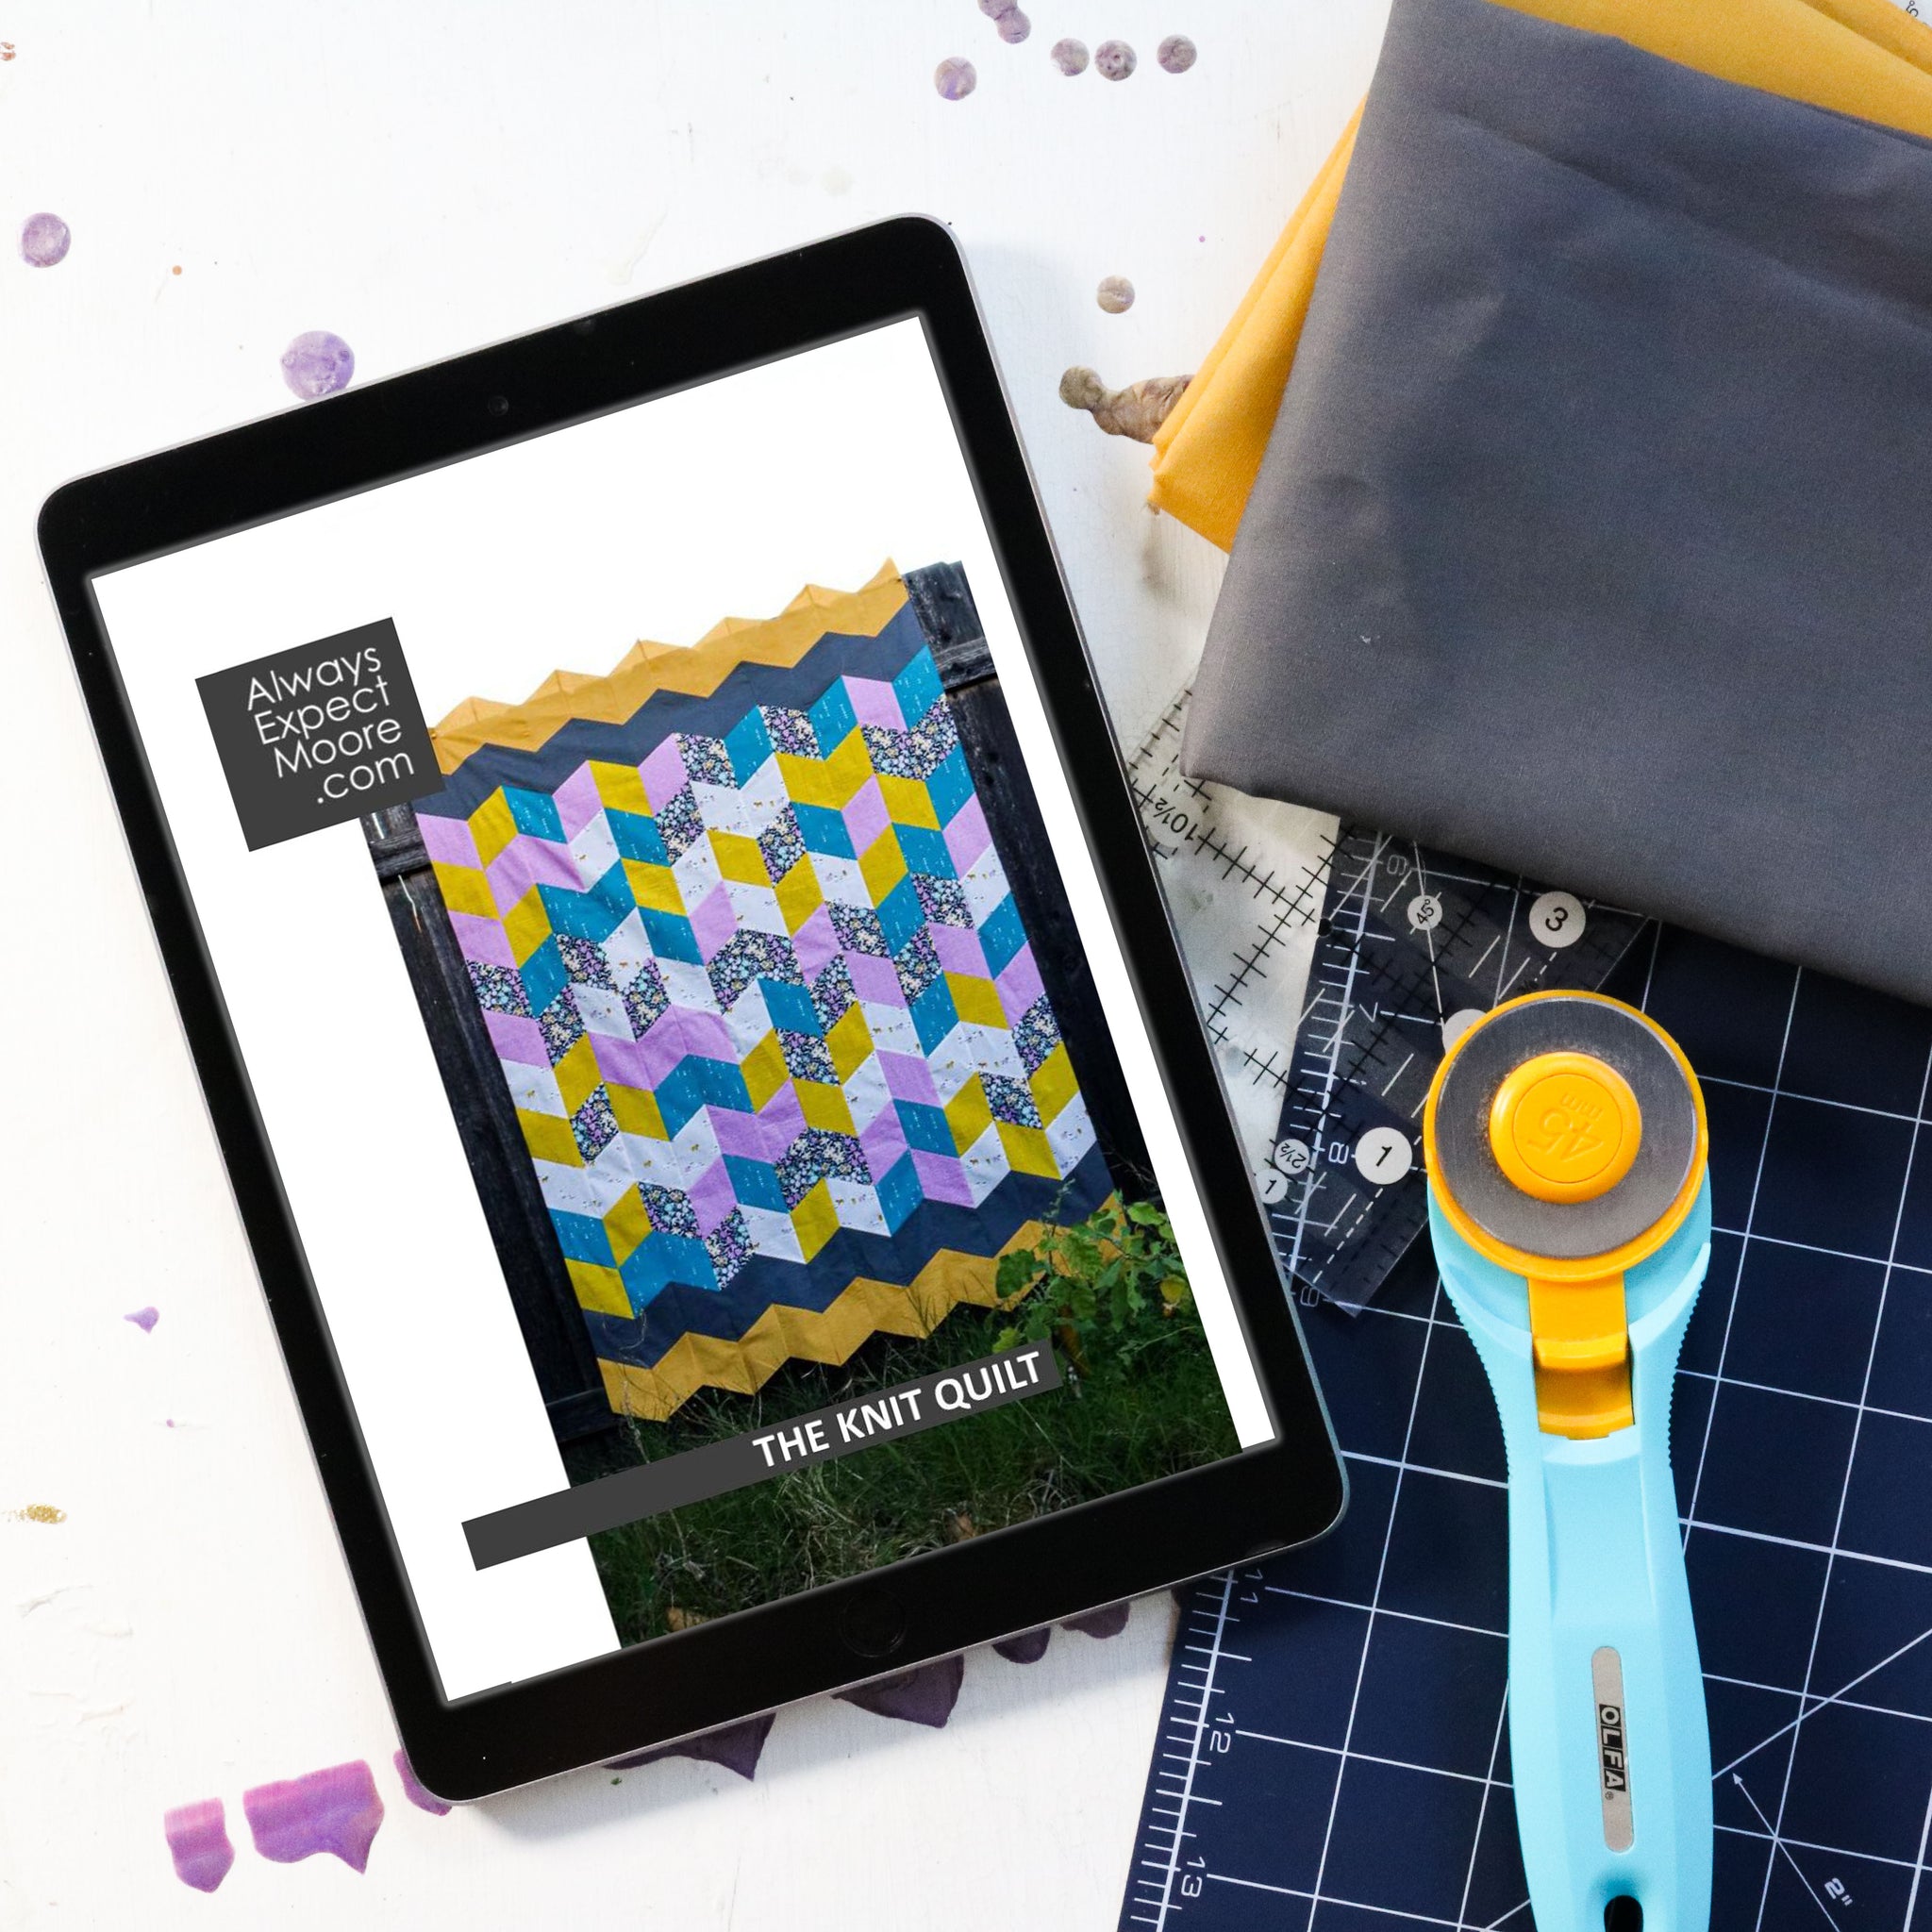 The Knit Quilt - Digital Download Pattern